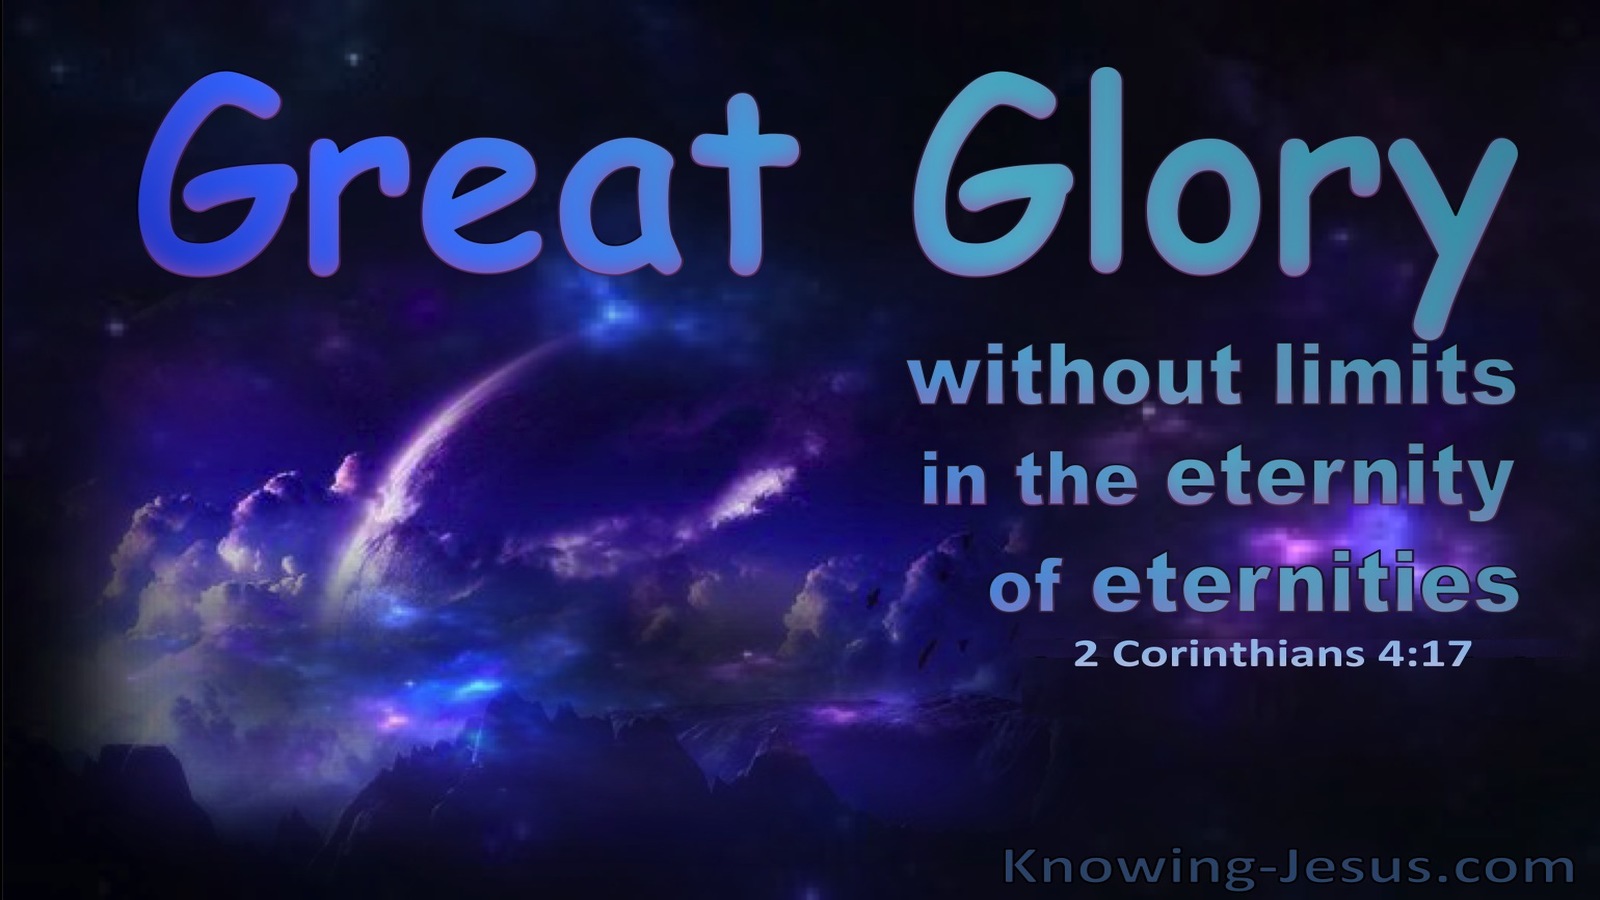 2 Corinthians 4:17 Great Glory Without Limits In Etermity (blue)